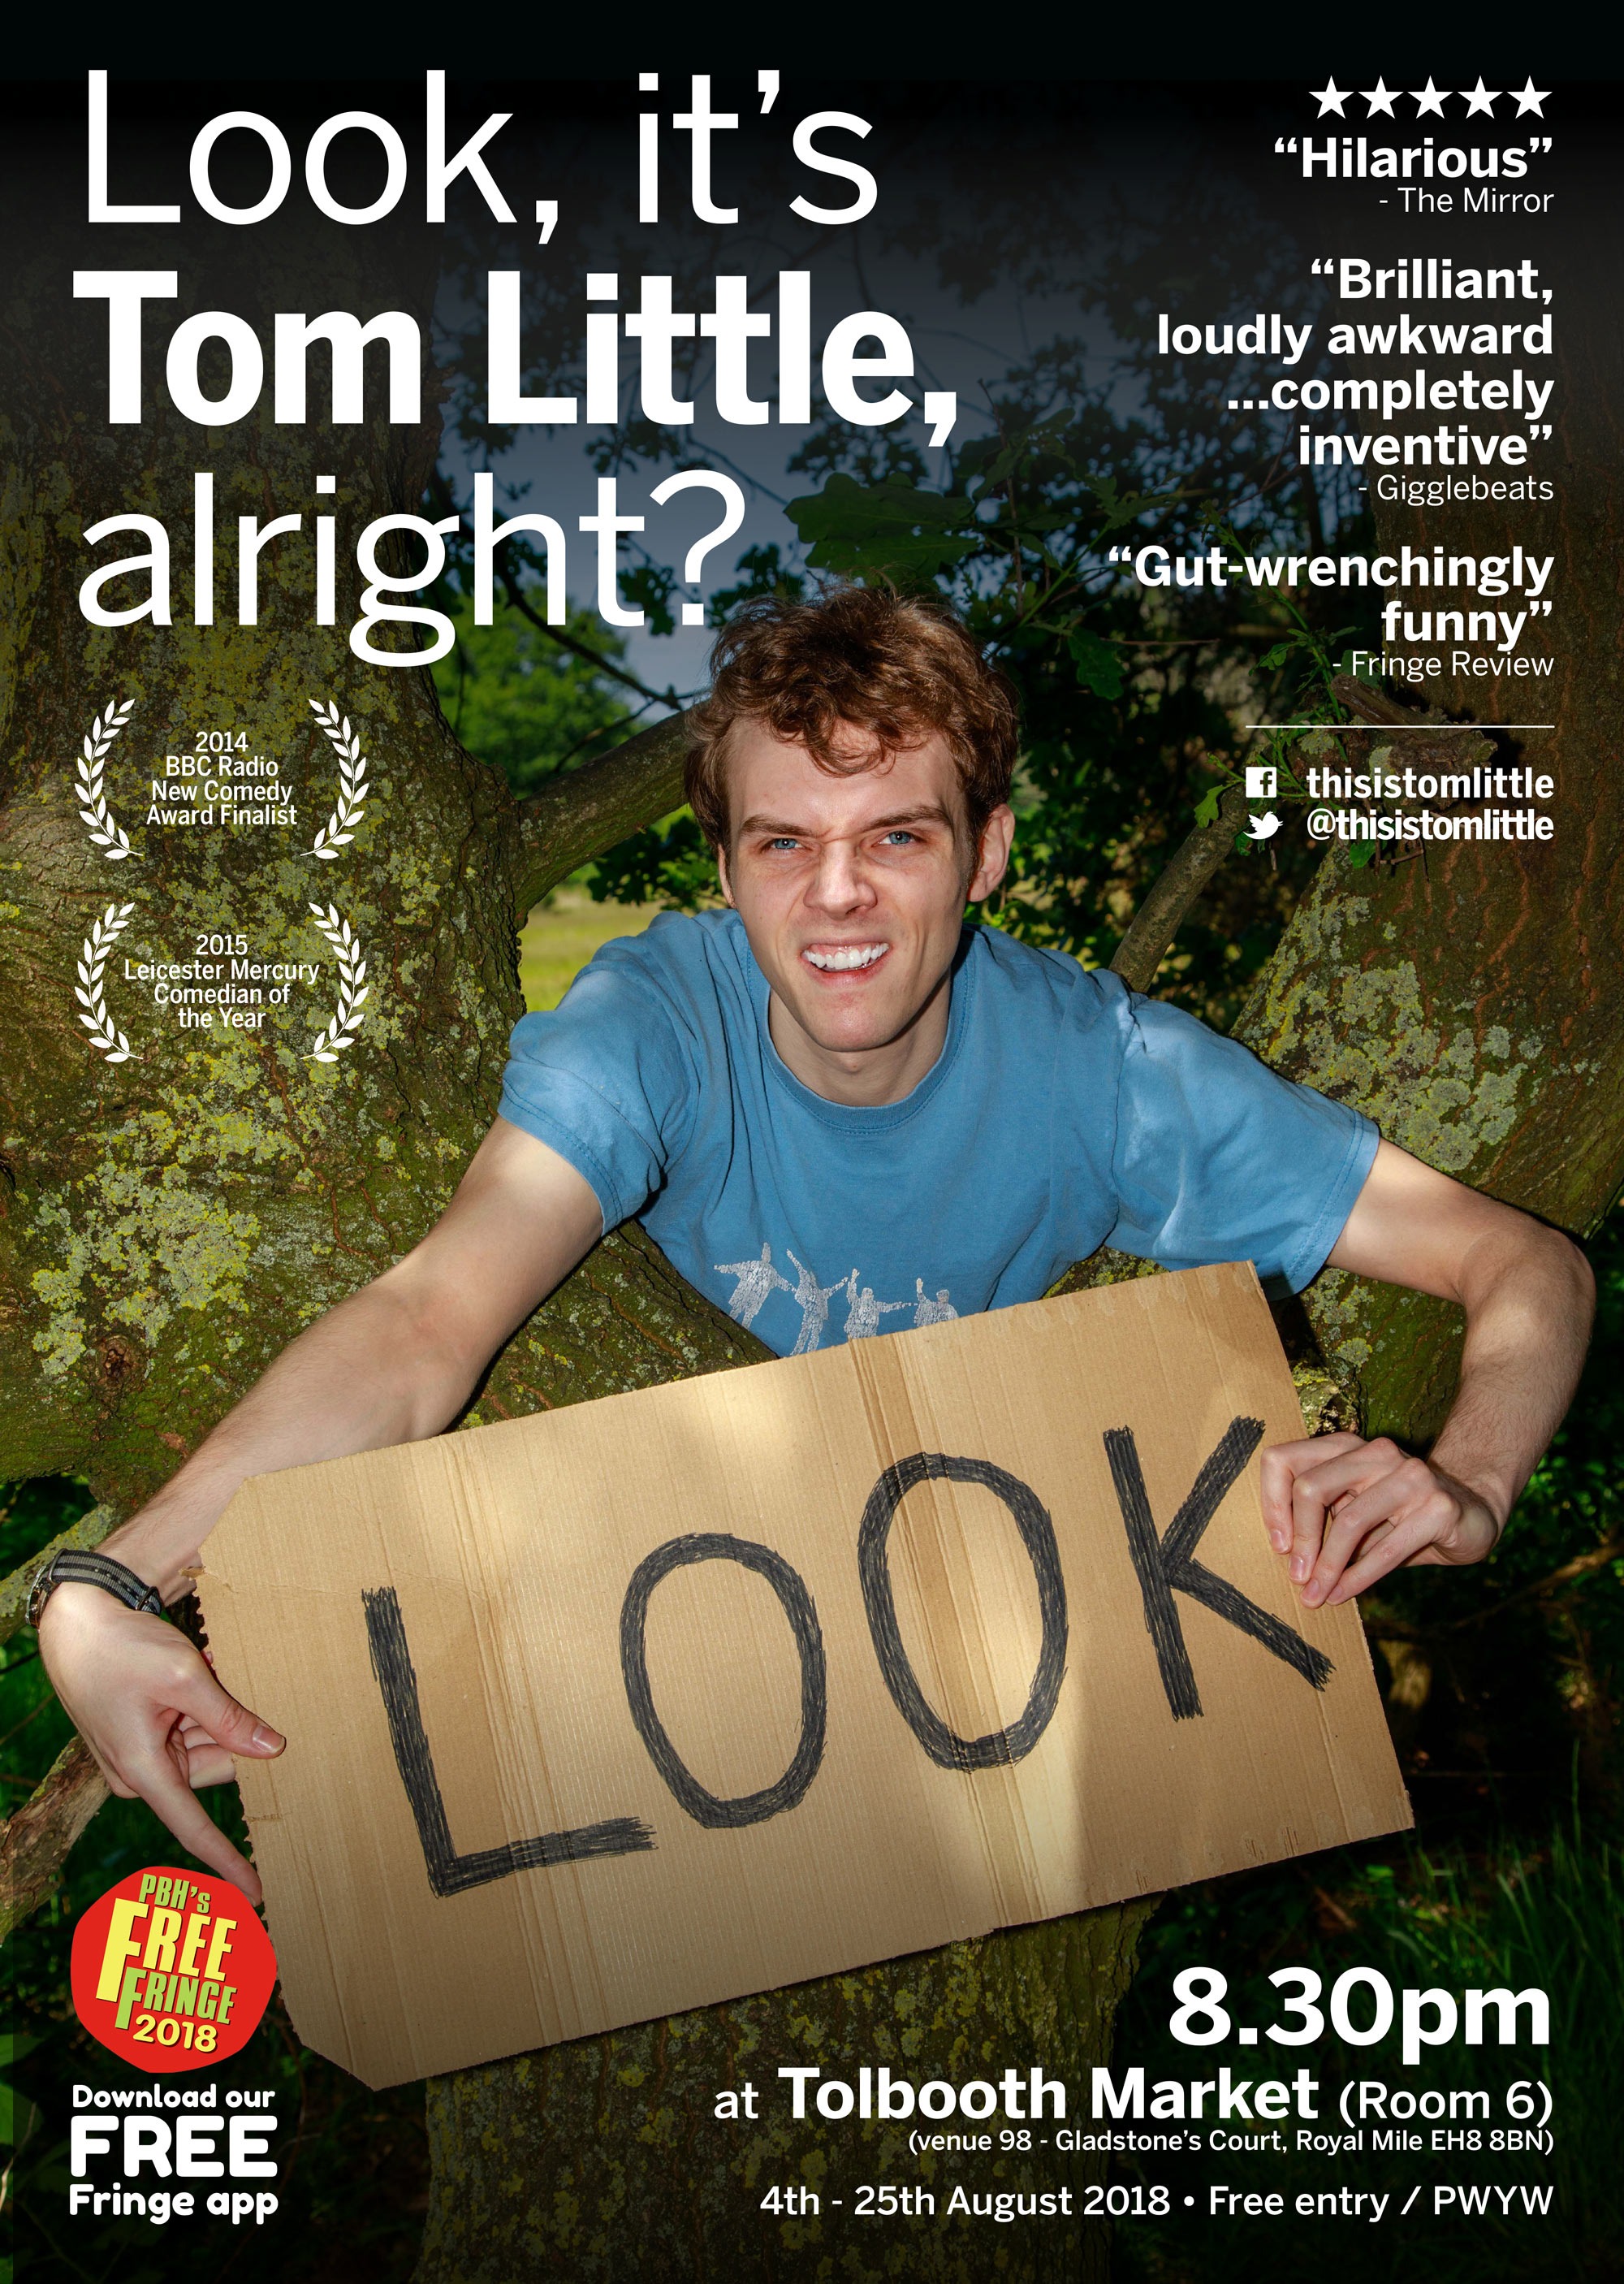 The poster for Look, It's Tom Little, Alright?